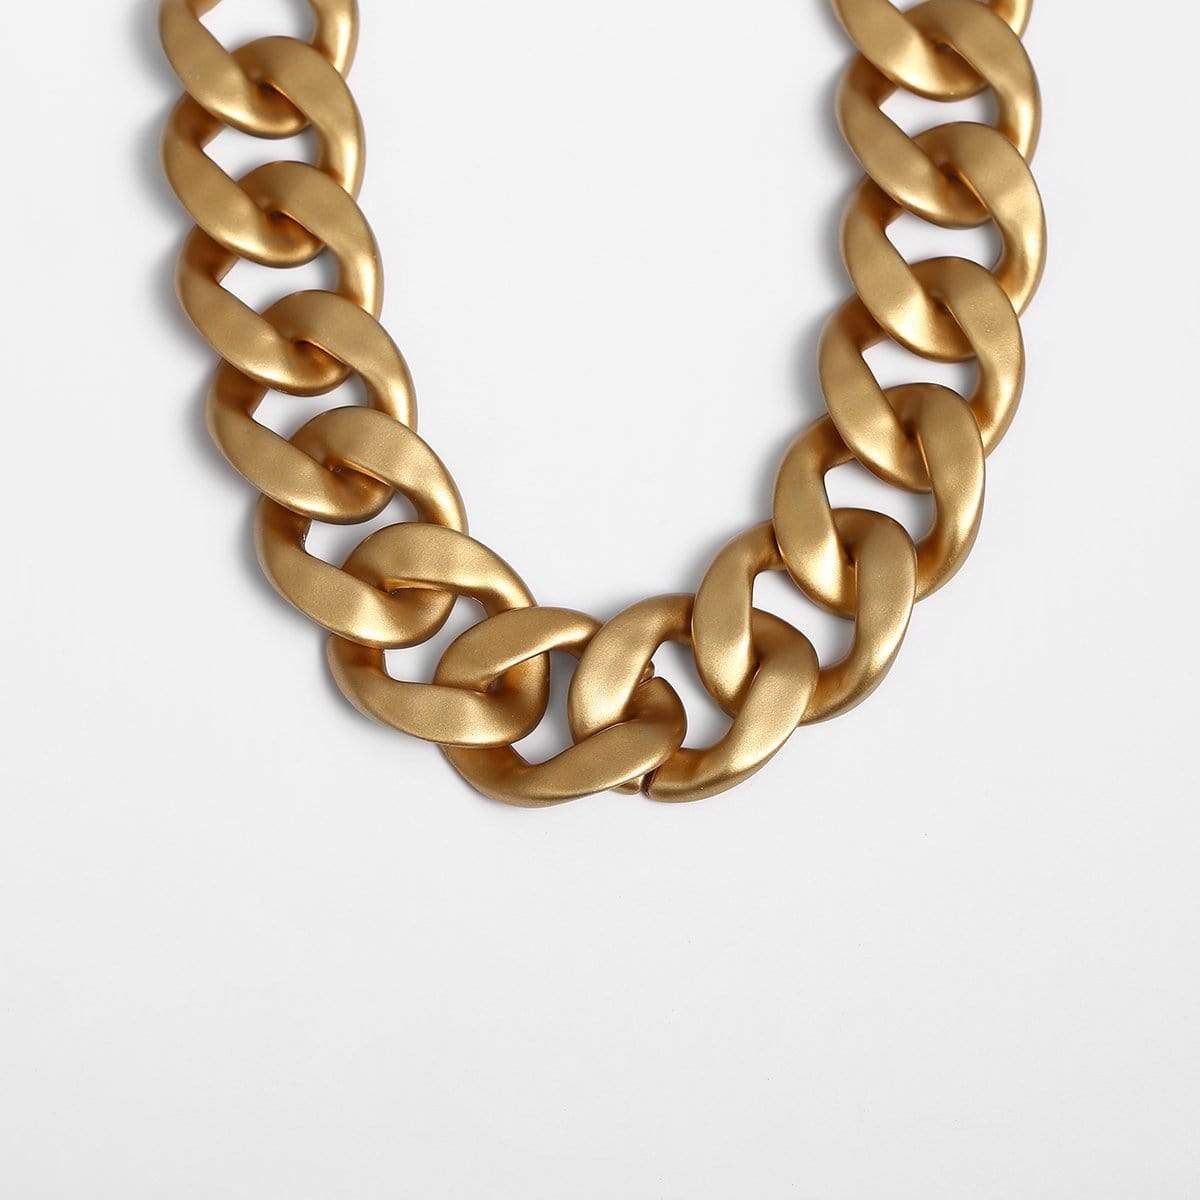 Chunky Curb Link Chain Choker Necklace - Chic Gold Tone Twisted Chain Necklace - ArtGalleryZen